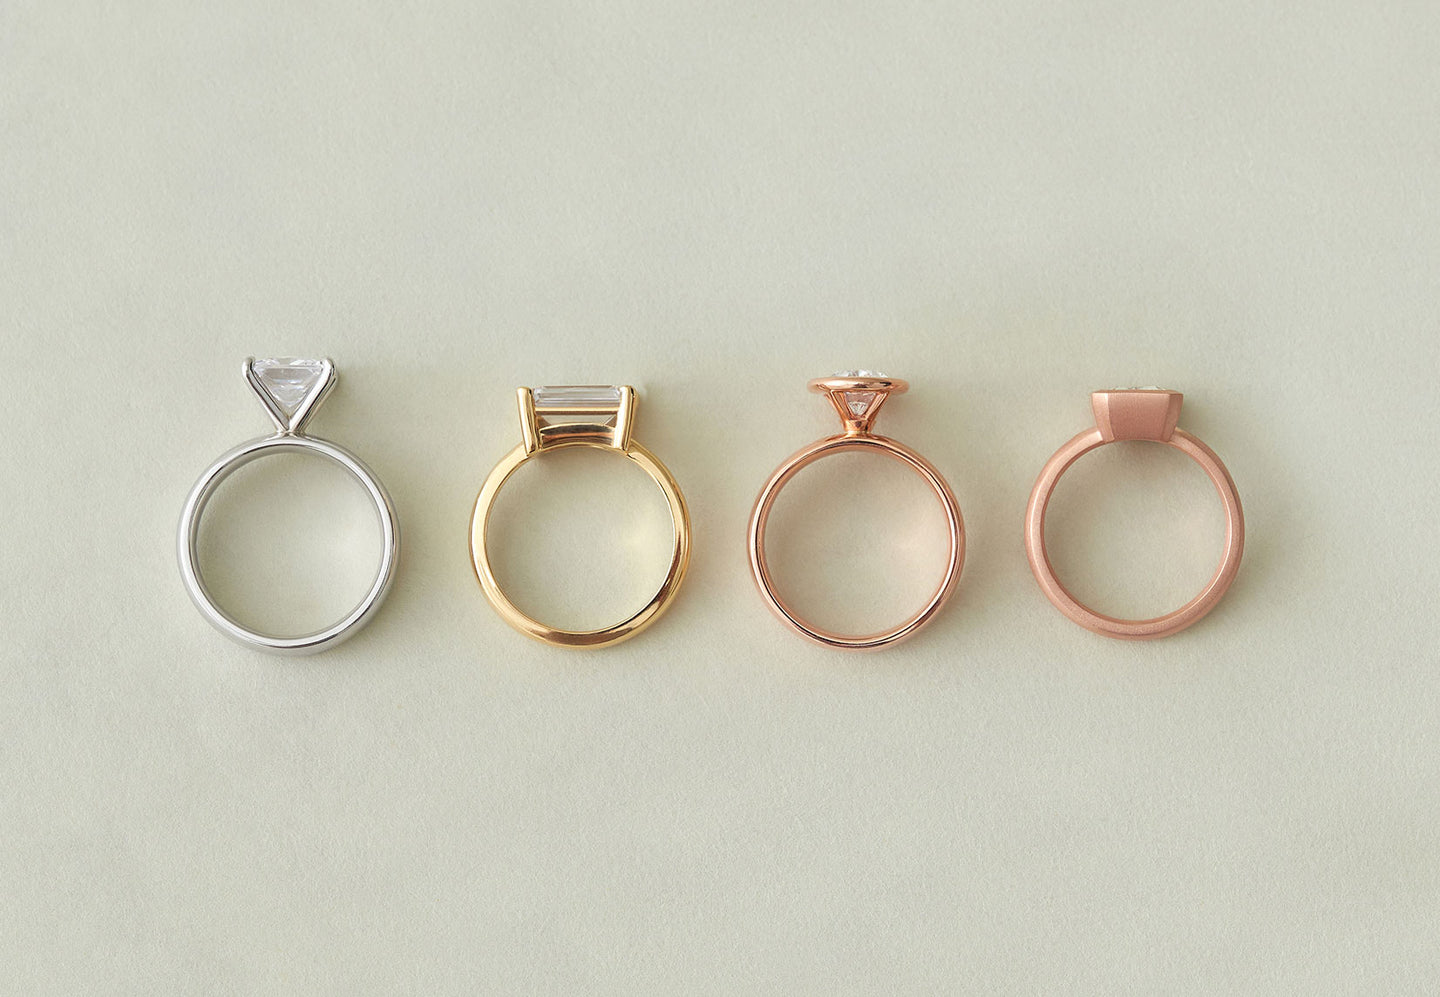 Comparison photo showing high and low-set engagement rings by Holden